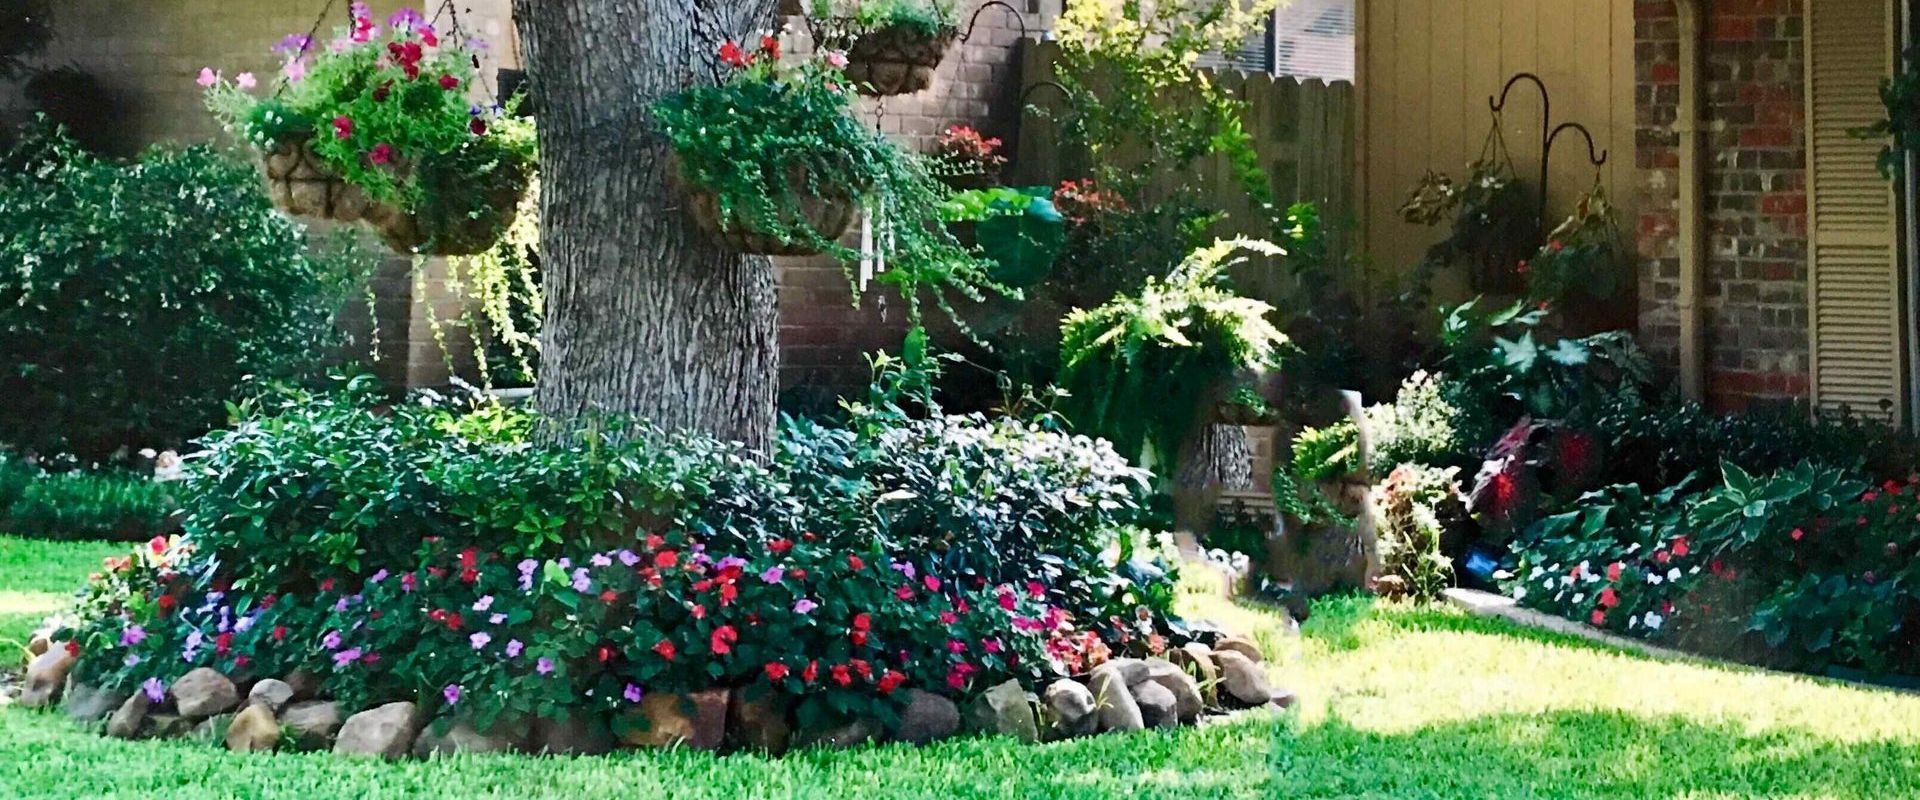 Landscaped Front Yard With Flower Bed Around Tree